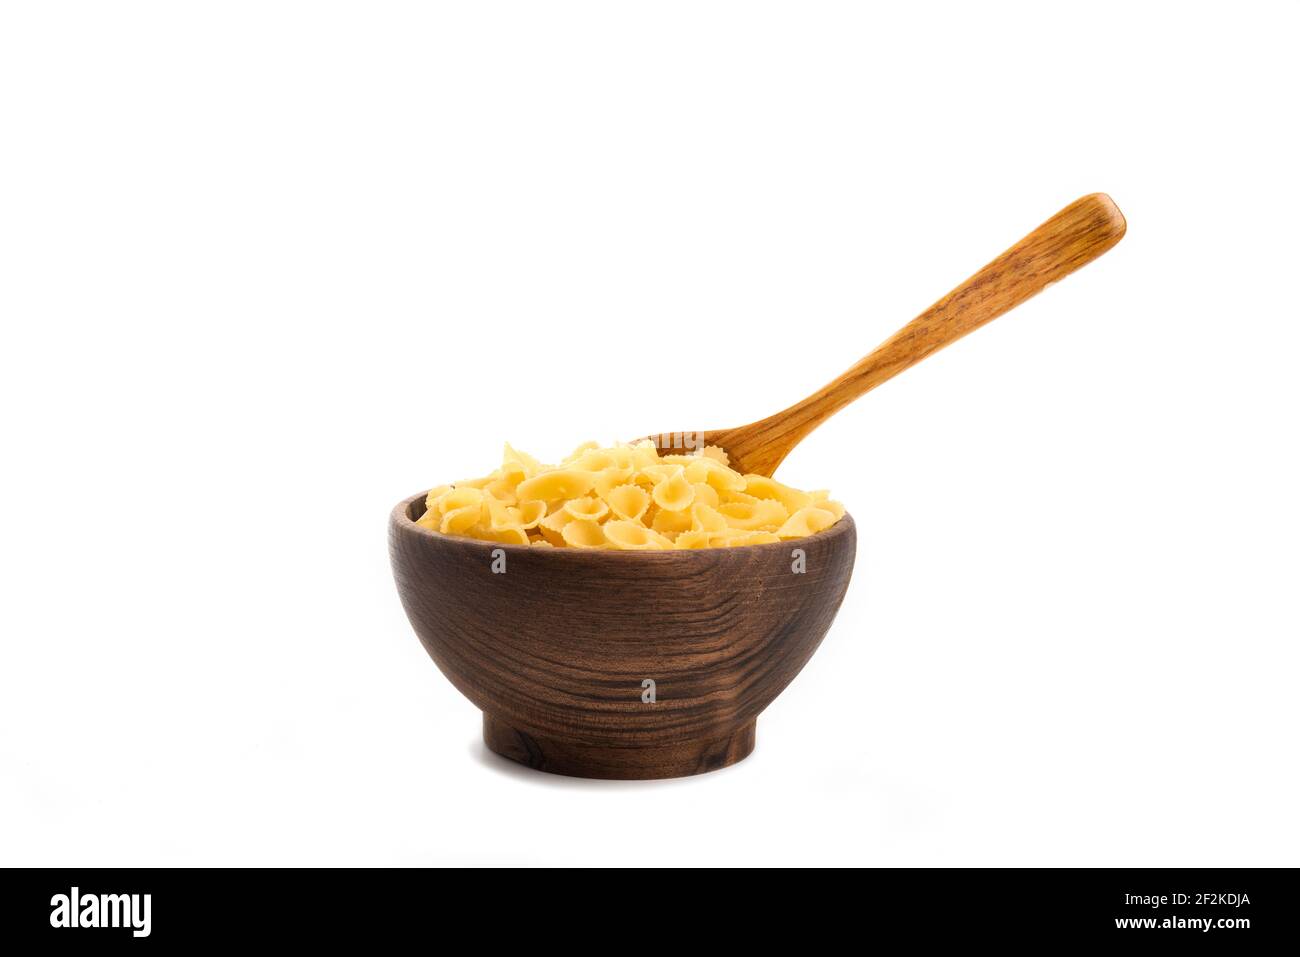 A wooden bowl full of dry uncooked whole wheat Italian pasta with wooden spoon Stock Photo